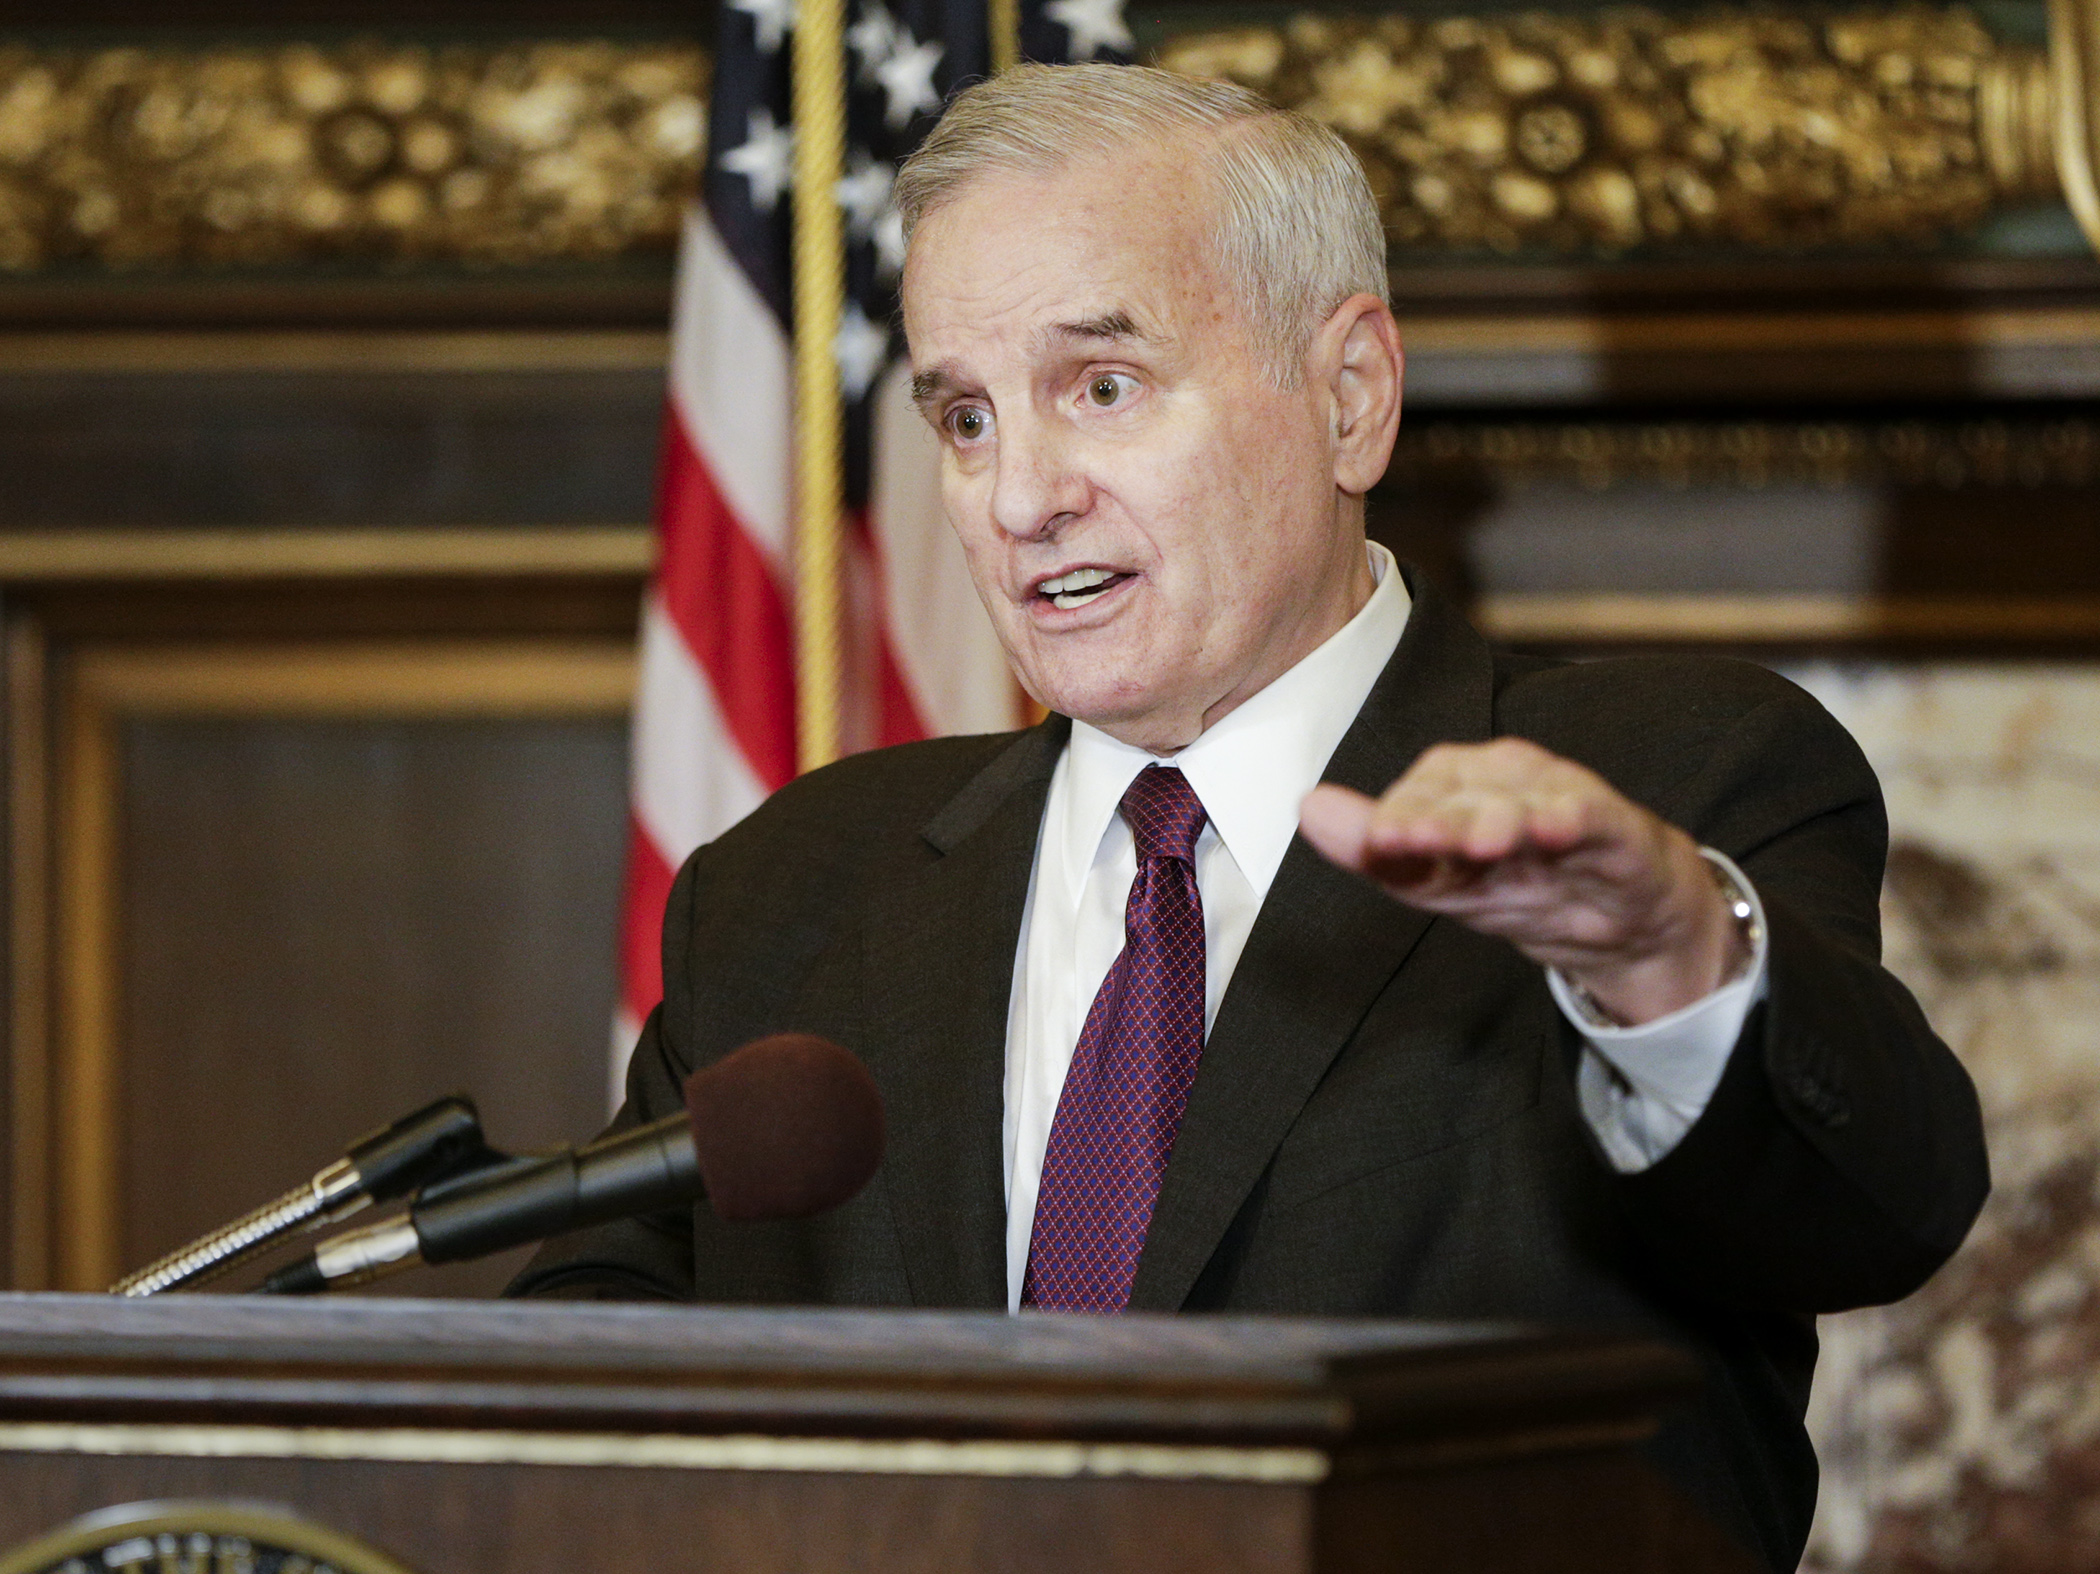 Gov. Mark Dayton speaks on a wide range of subjects, including school vouchers, light-rail and transit funding, and the general progress of the legislative session at an April 26 press conference. Photo by Paul Battaglia